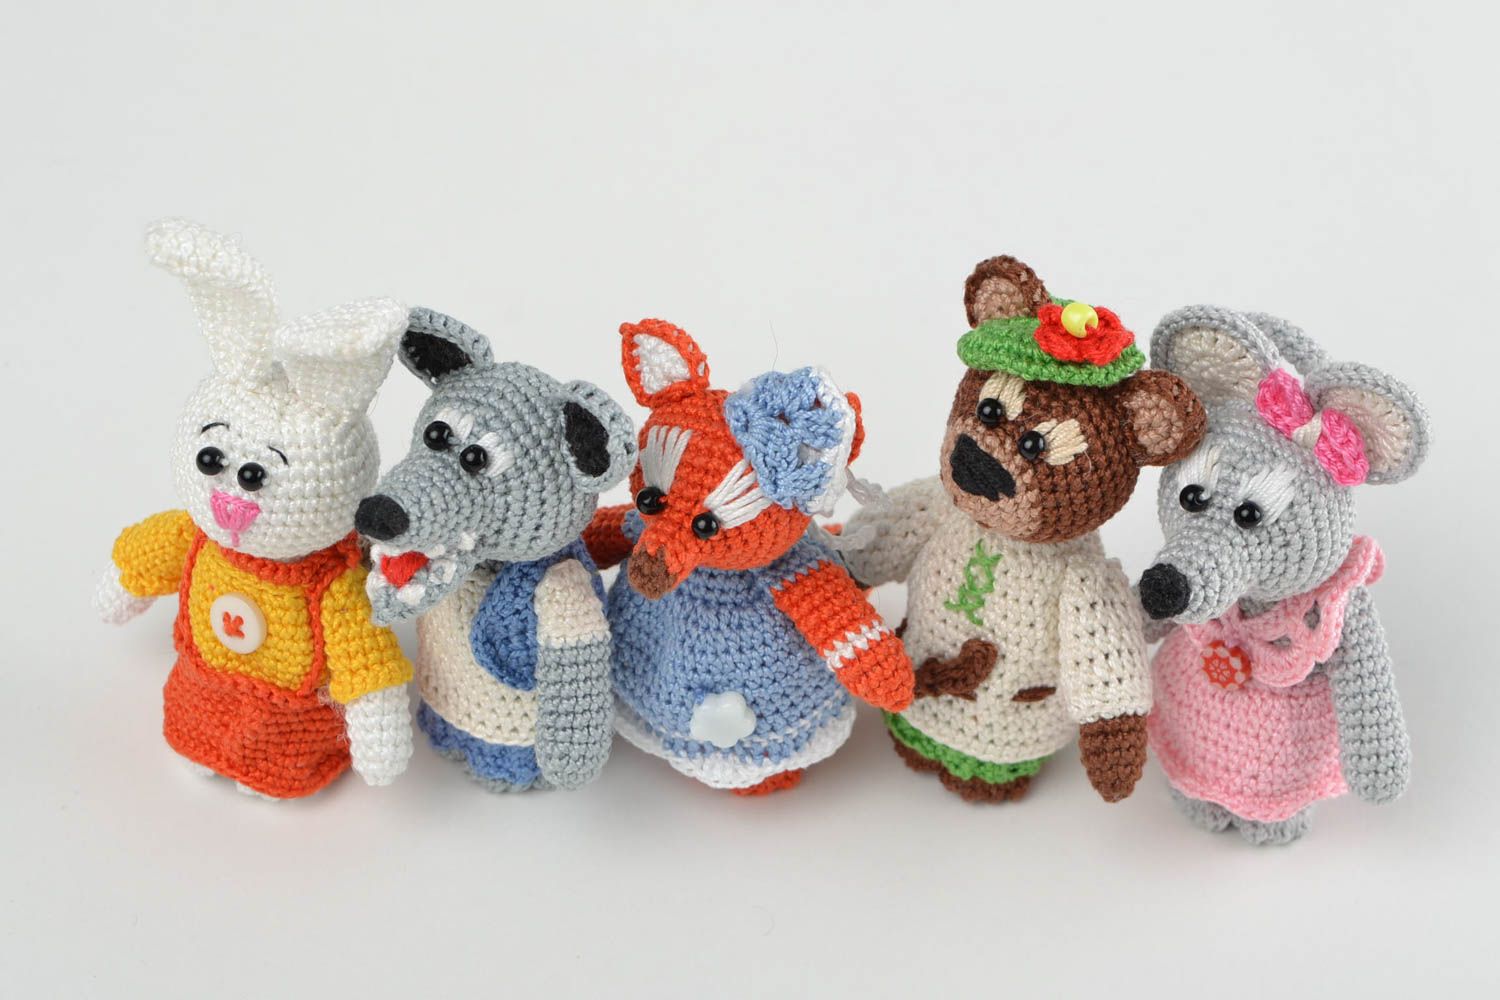 Handmade toy unusual finger toy set of 5 items handmade crocheted finger toy photo 4